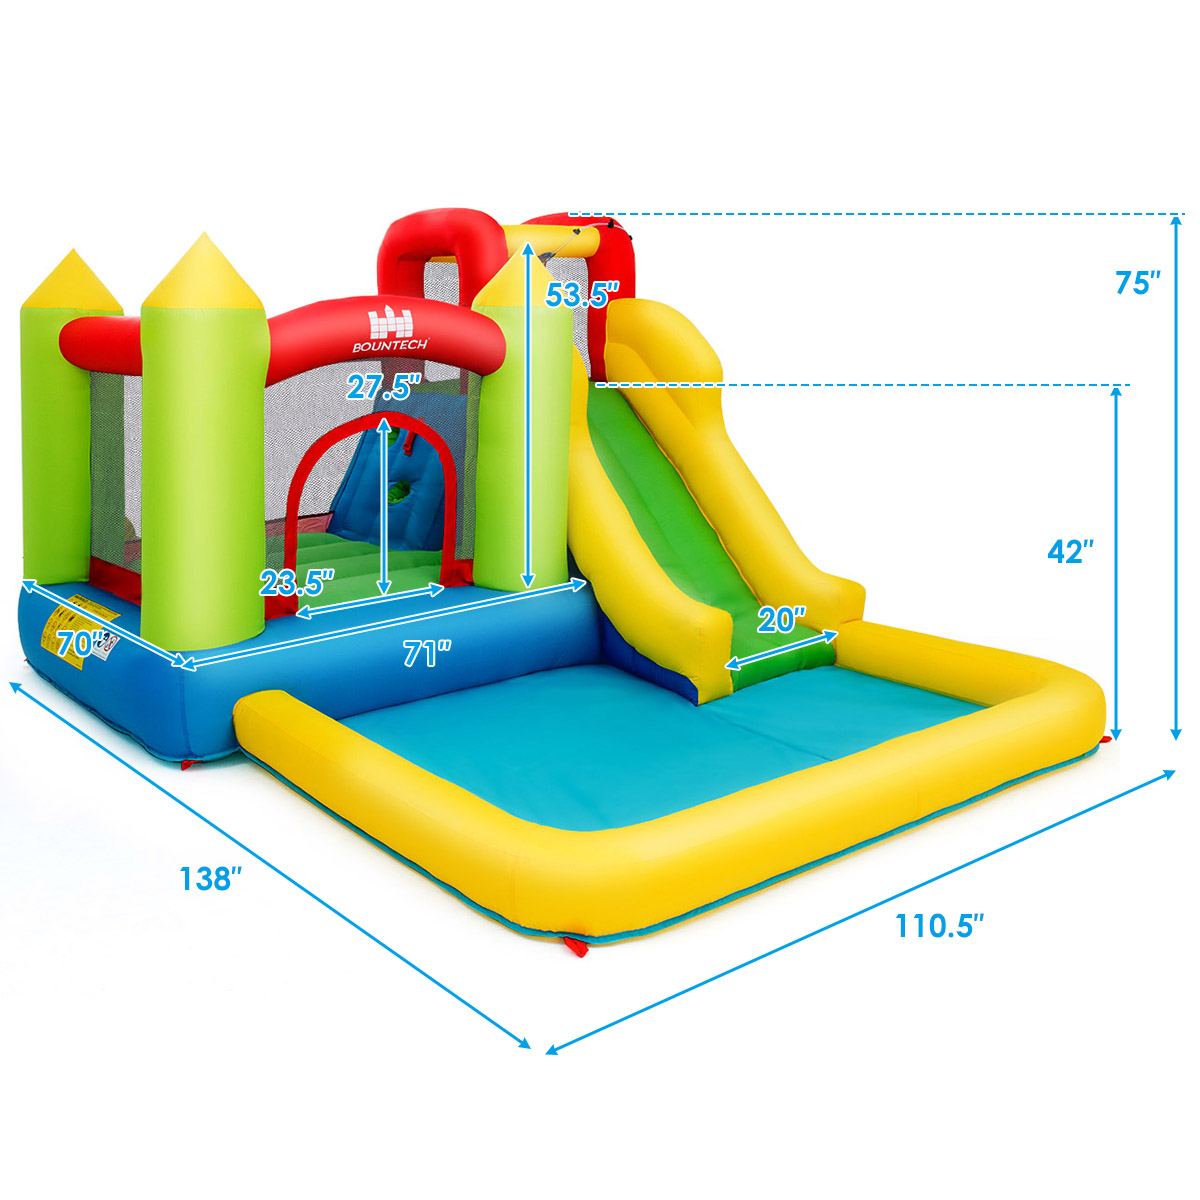 Costway Inflatable Bounce House Water Slide Jump Bouncer Climbing Wall Splash Pool Blower Excluded - image 2 of 10